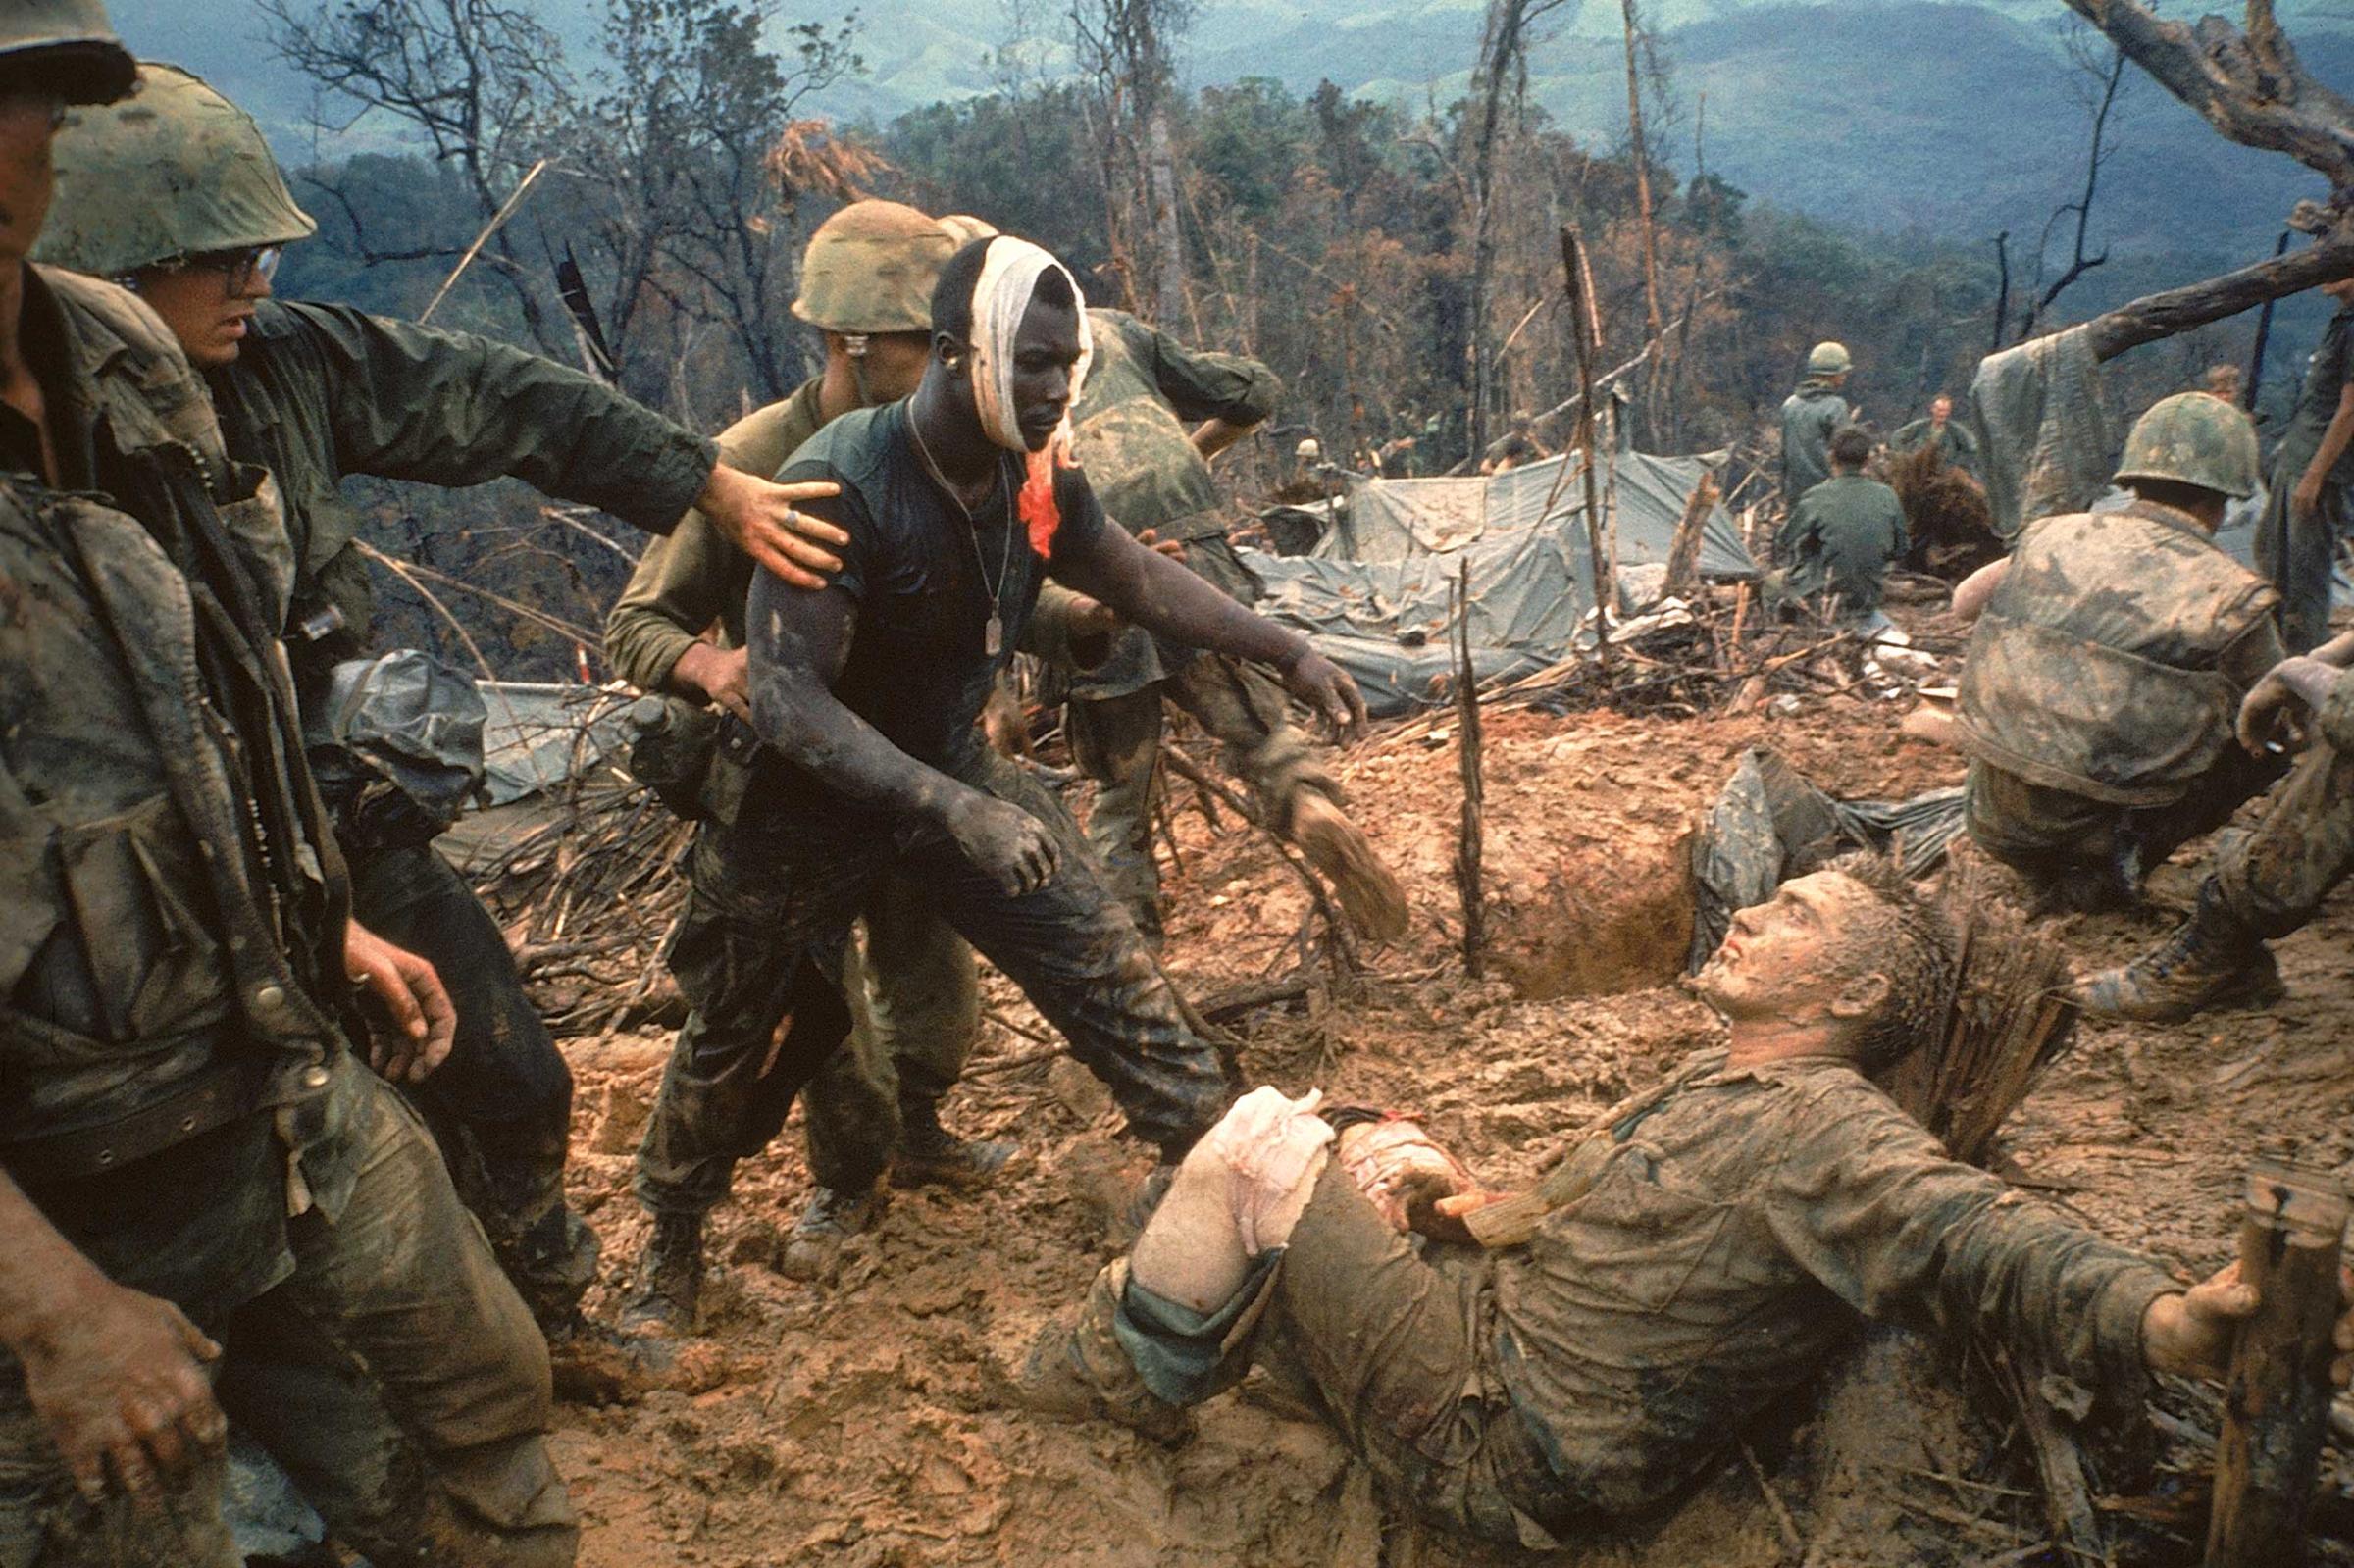 Wounded Marine Gunnery Sgt. Jeremiah Purdie (center) moves to try and comfort a stricken comrade after a fierce firefight during the Vietnam War. Photographed for an essay that ran in the October 28, 1966, issue of LIFE, this Larry Burrows picture — now regarded as one of the handful of utterly indispensable images from the war — did not appear in the magazine until February 1971.